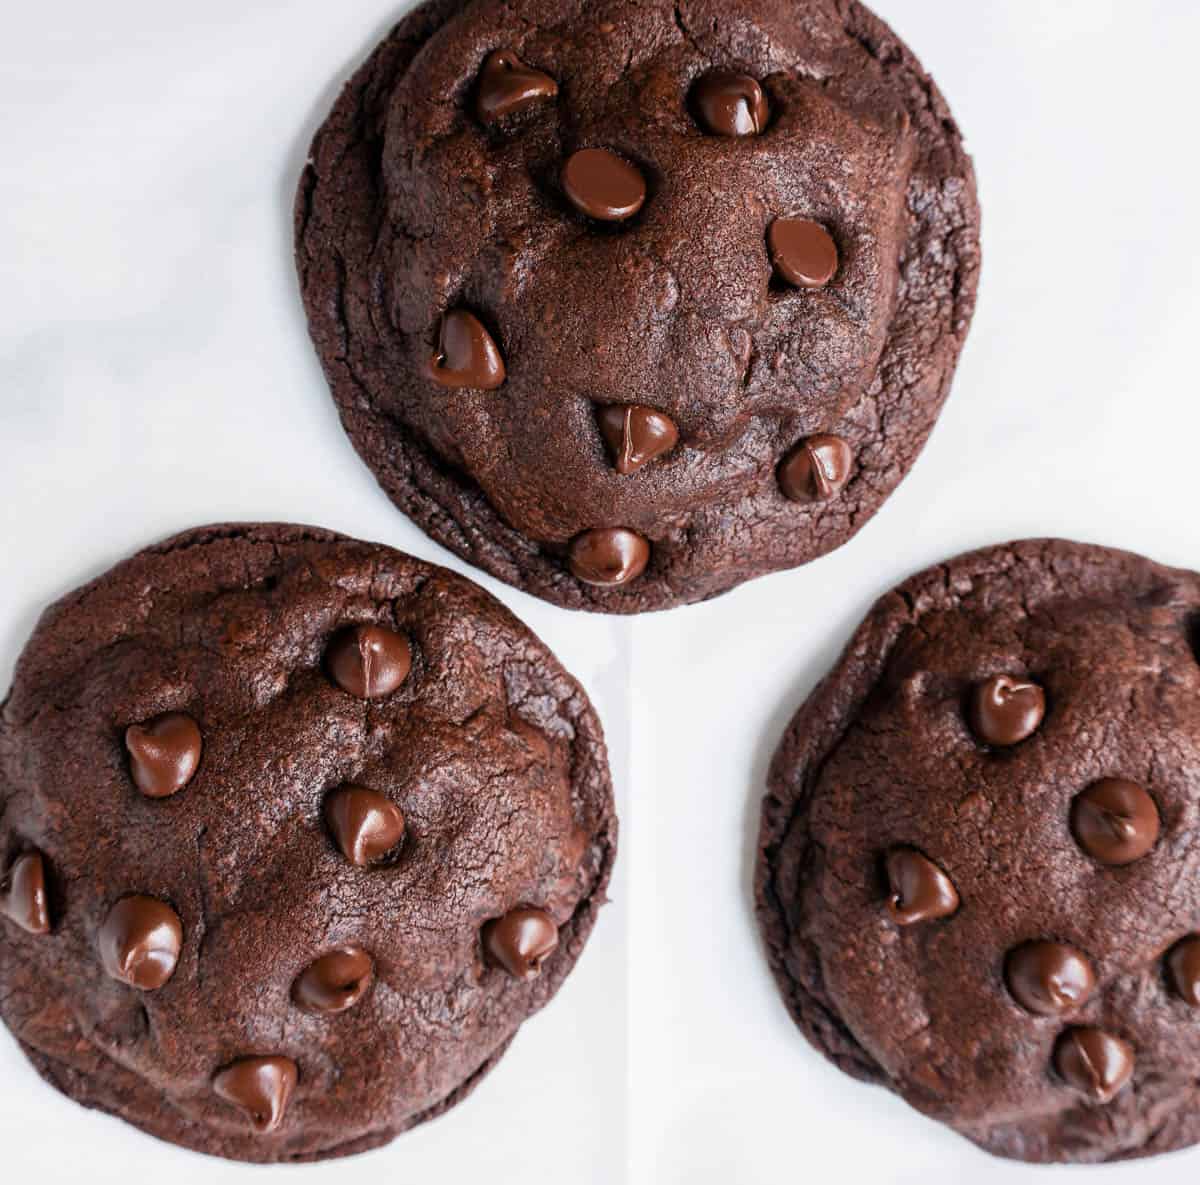 Soft, chewy, fudge-like Chocolate Chocolate Chip Cookies are made with two types of chocolate -- dutch cocoa and semi-sweet chocolate. This is the best double chocolate chip cookie recipe! These rich, decadent double chocolate cookies are for all of my chocolate lovers!